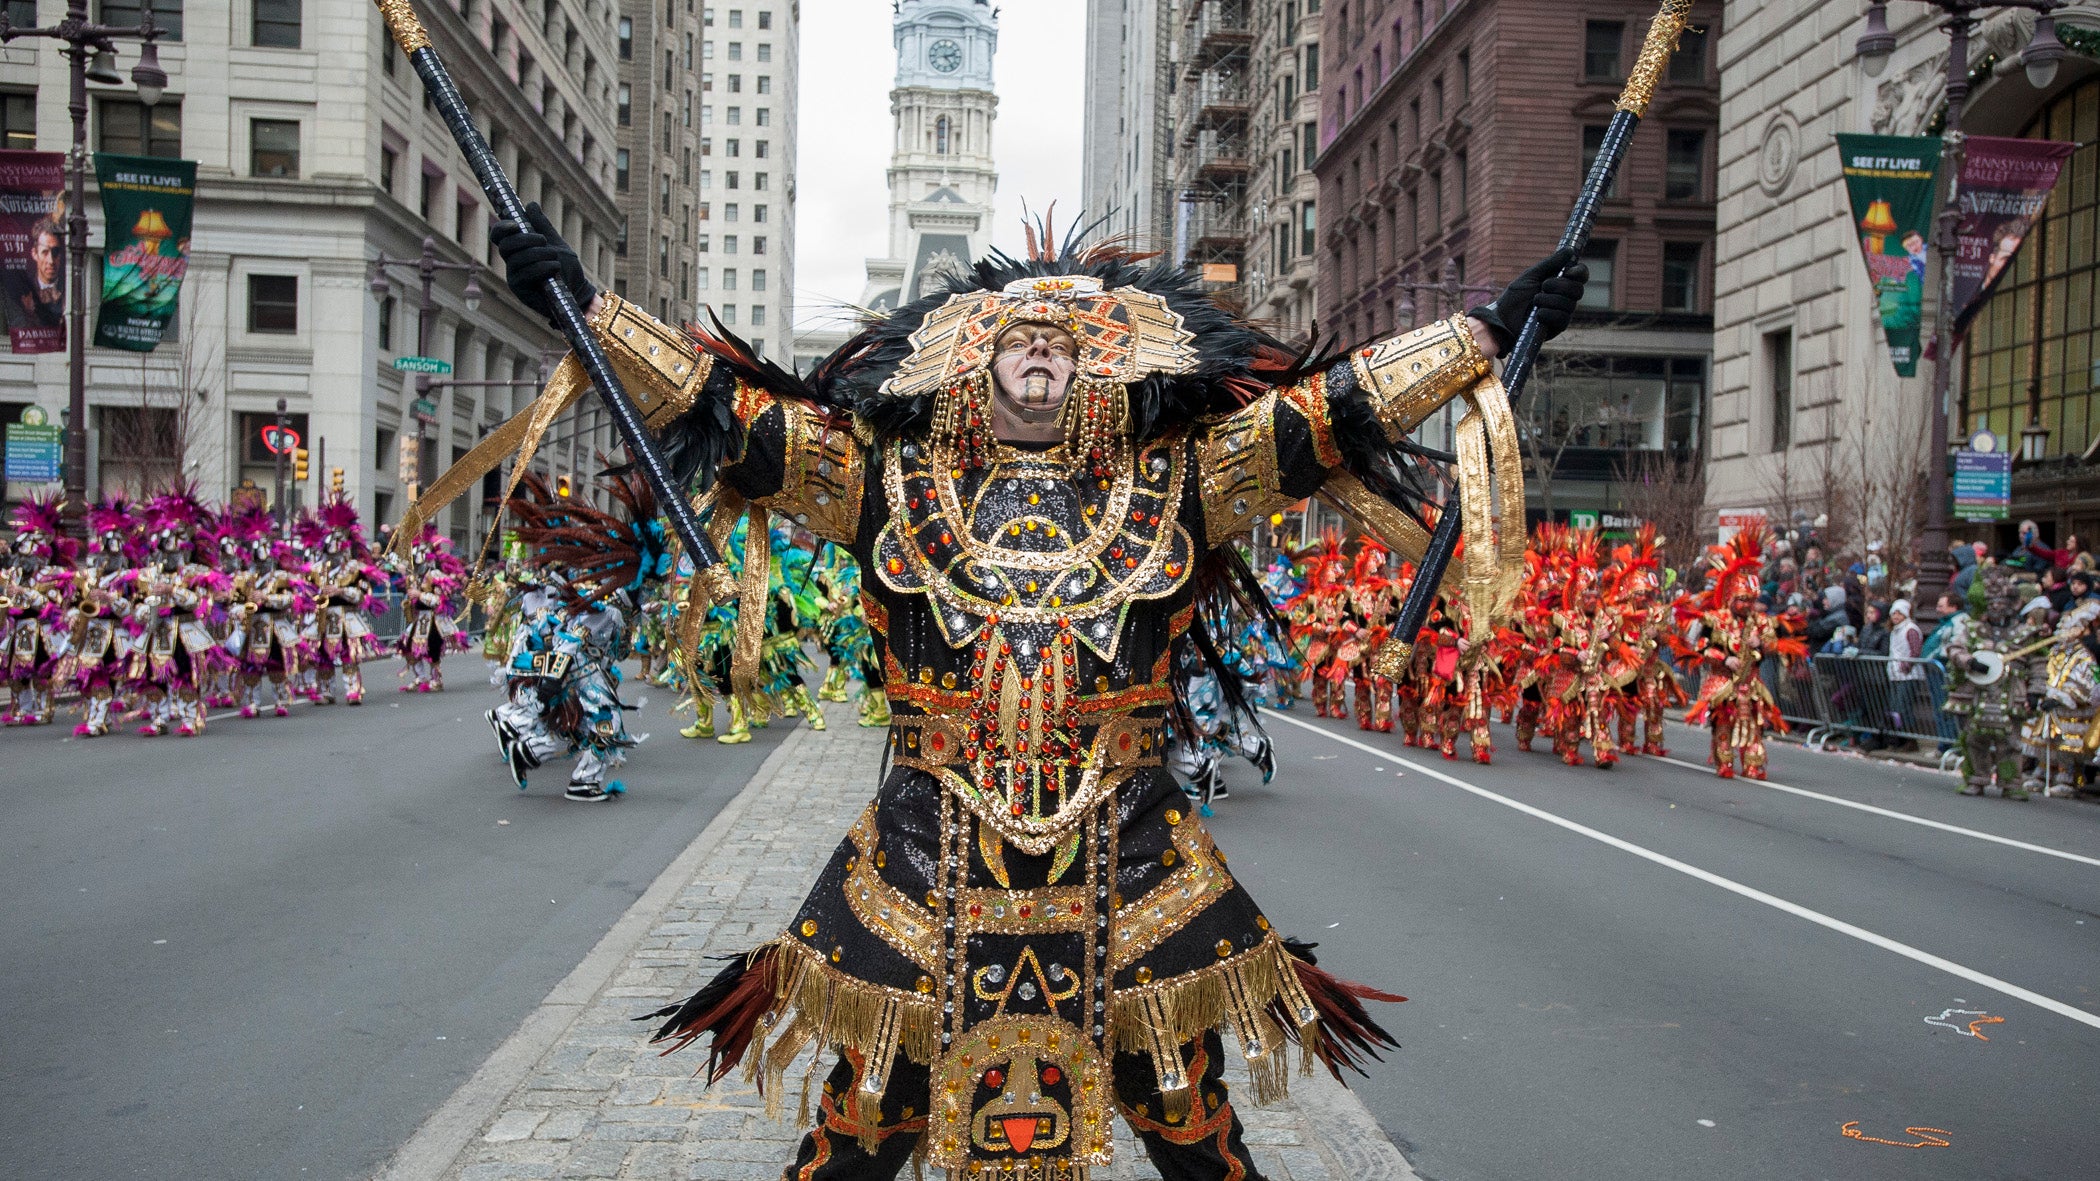 The Fralinger String Band concludes its performance at Broad and Sansom streets during the 2016 parade. (Jonathan Wilson for NewsWorks)